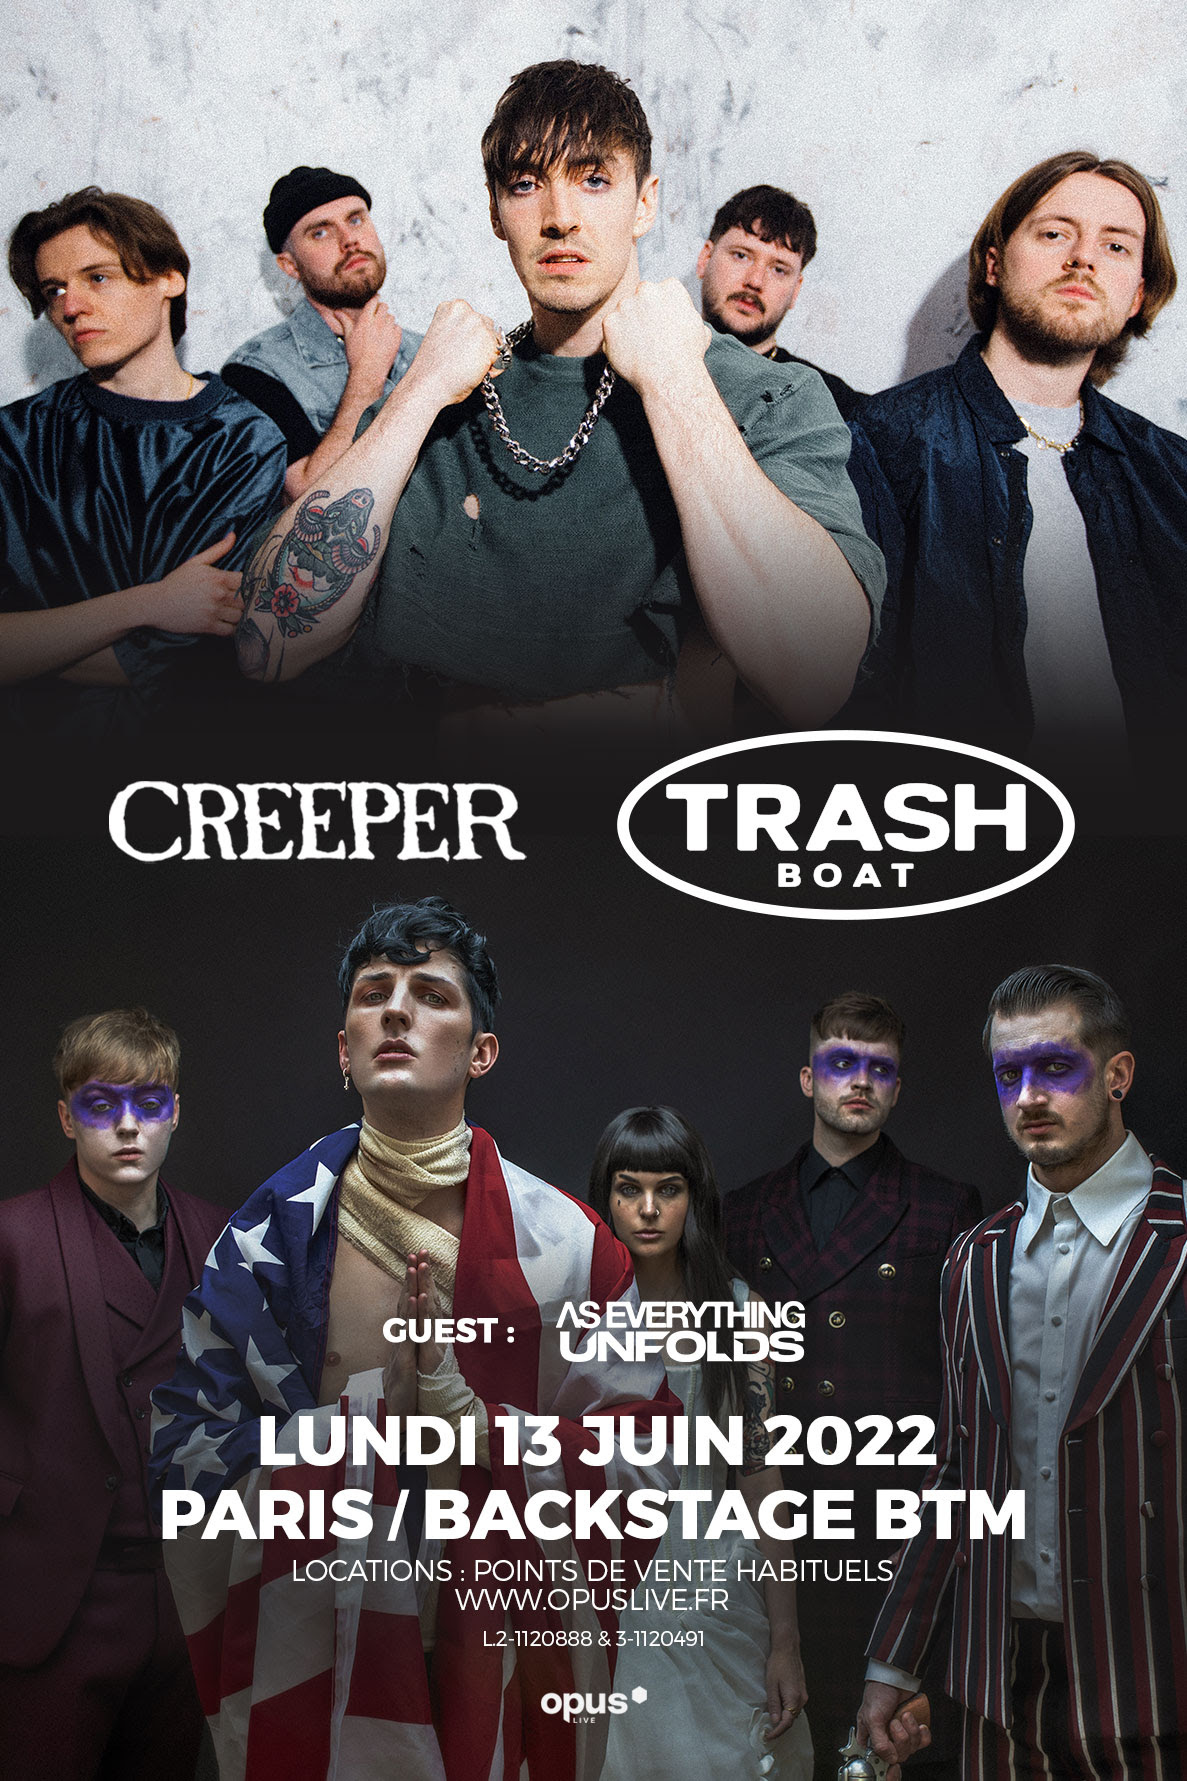 https://web.digitick.com/trash-boat-creeper-as-everything-unfolds-le-backstage-by-the-mill-paris-13-juin-2022-css5-opuslive-pg101-ri8812737.html